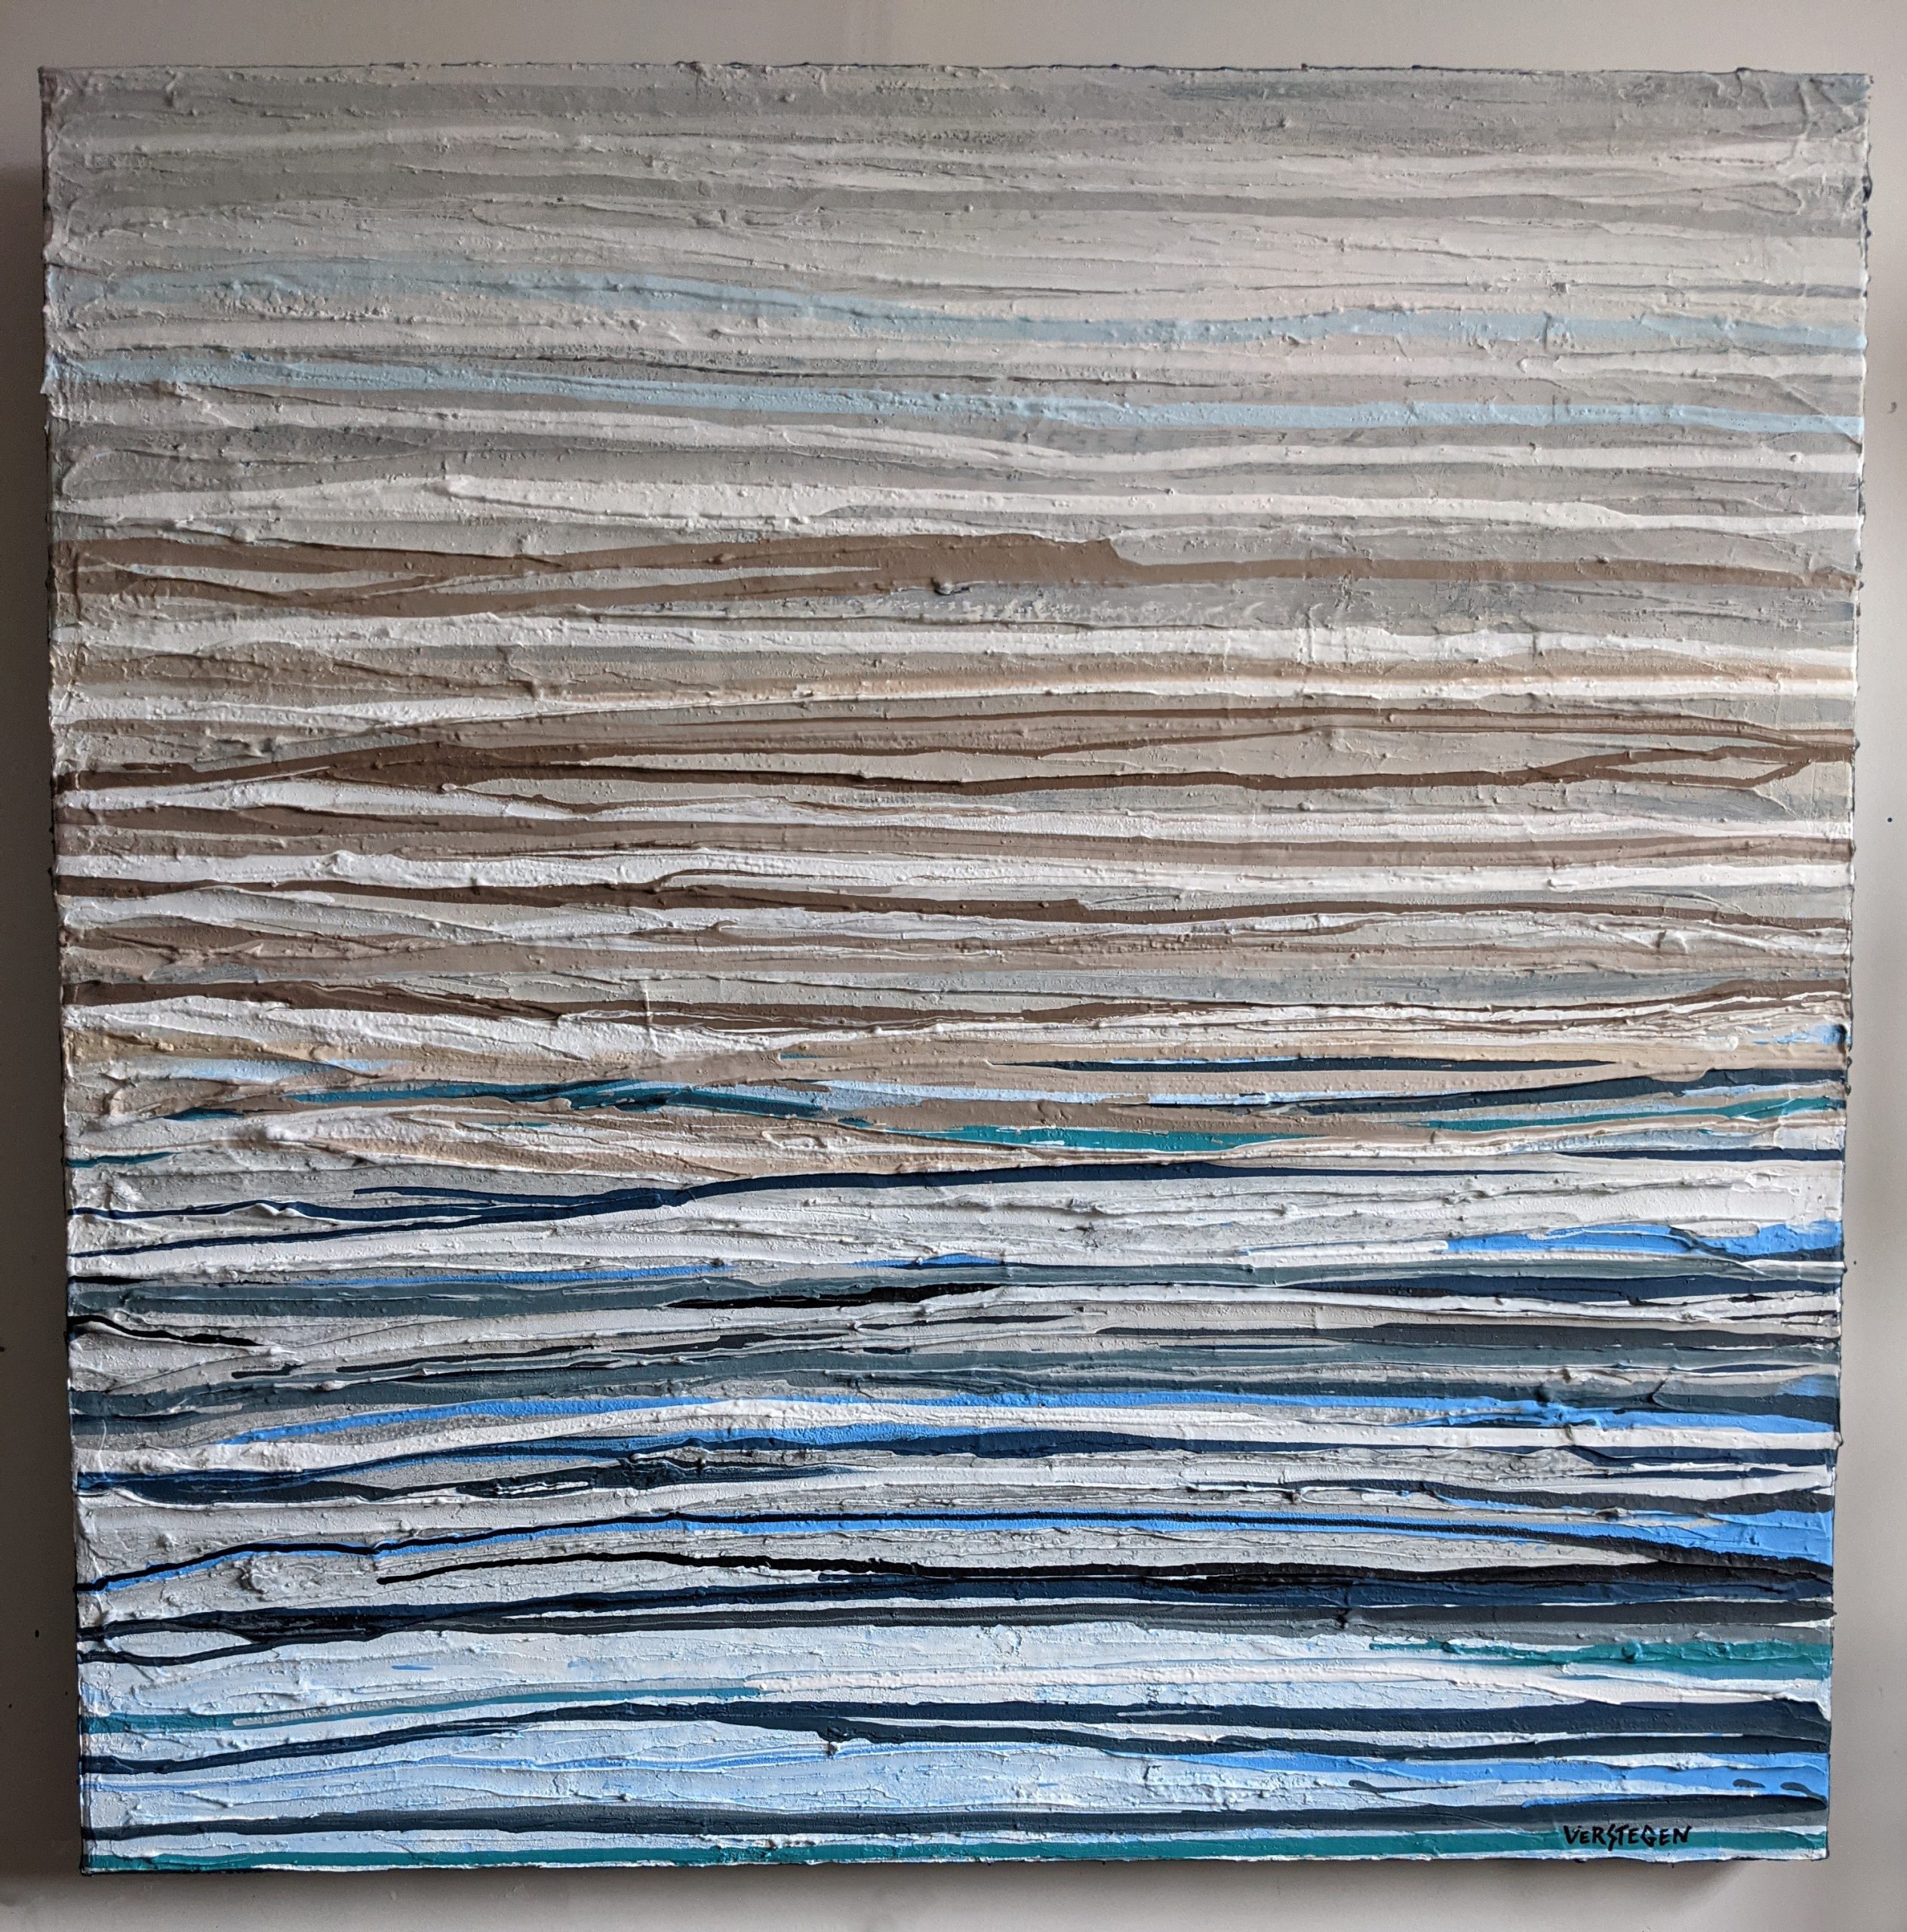 All of the Sea (80x80)